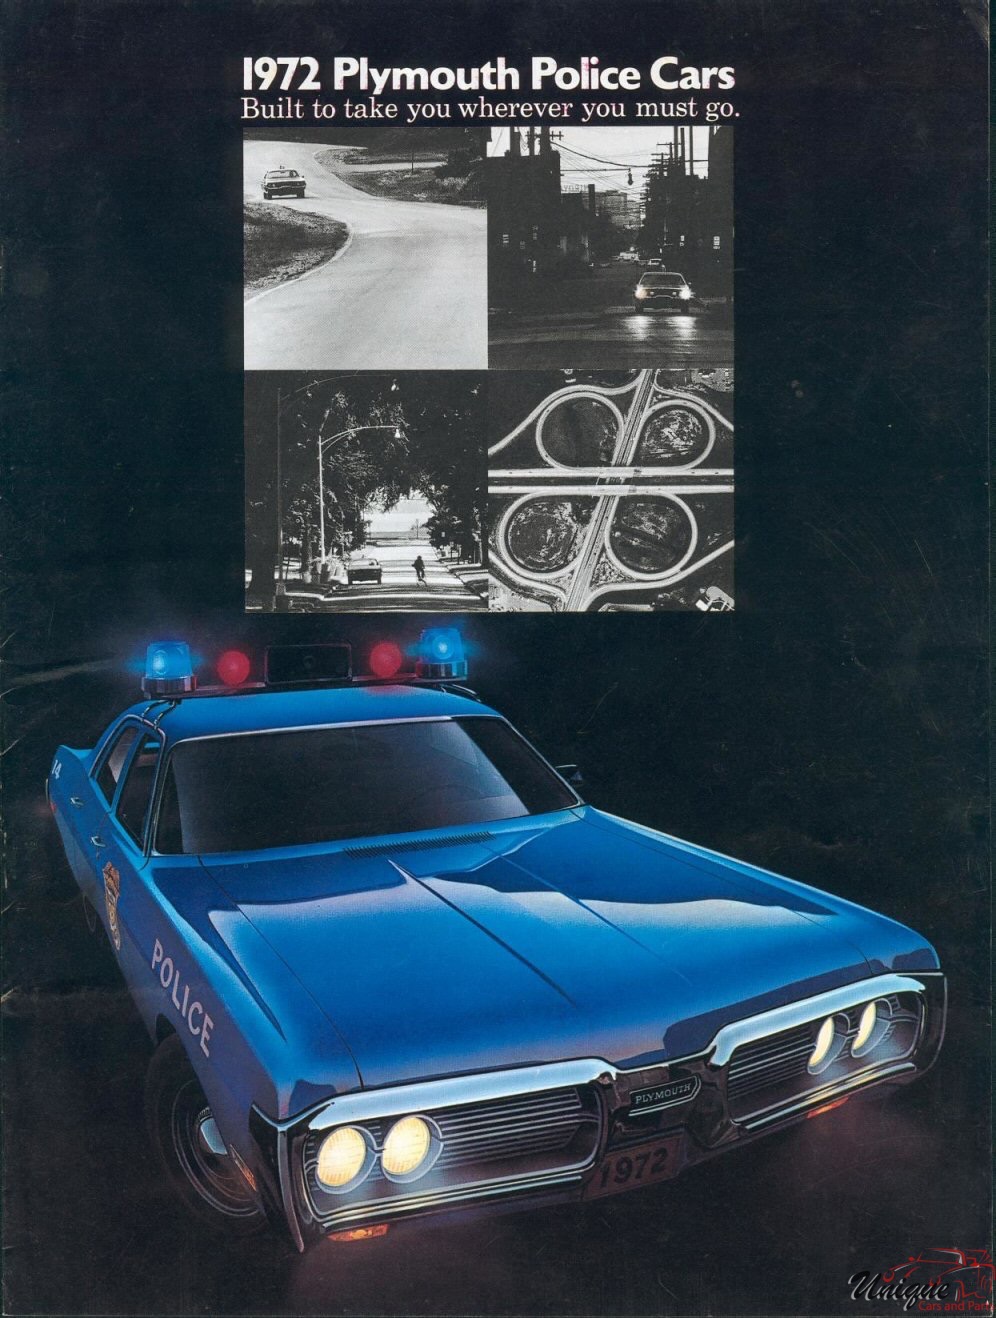 1972 Plymouth Police-Cars Brochure